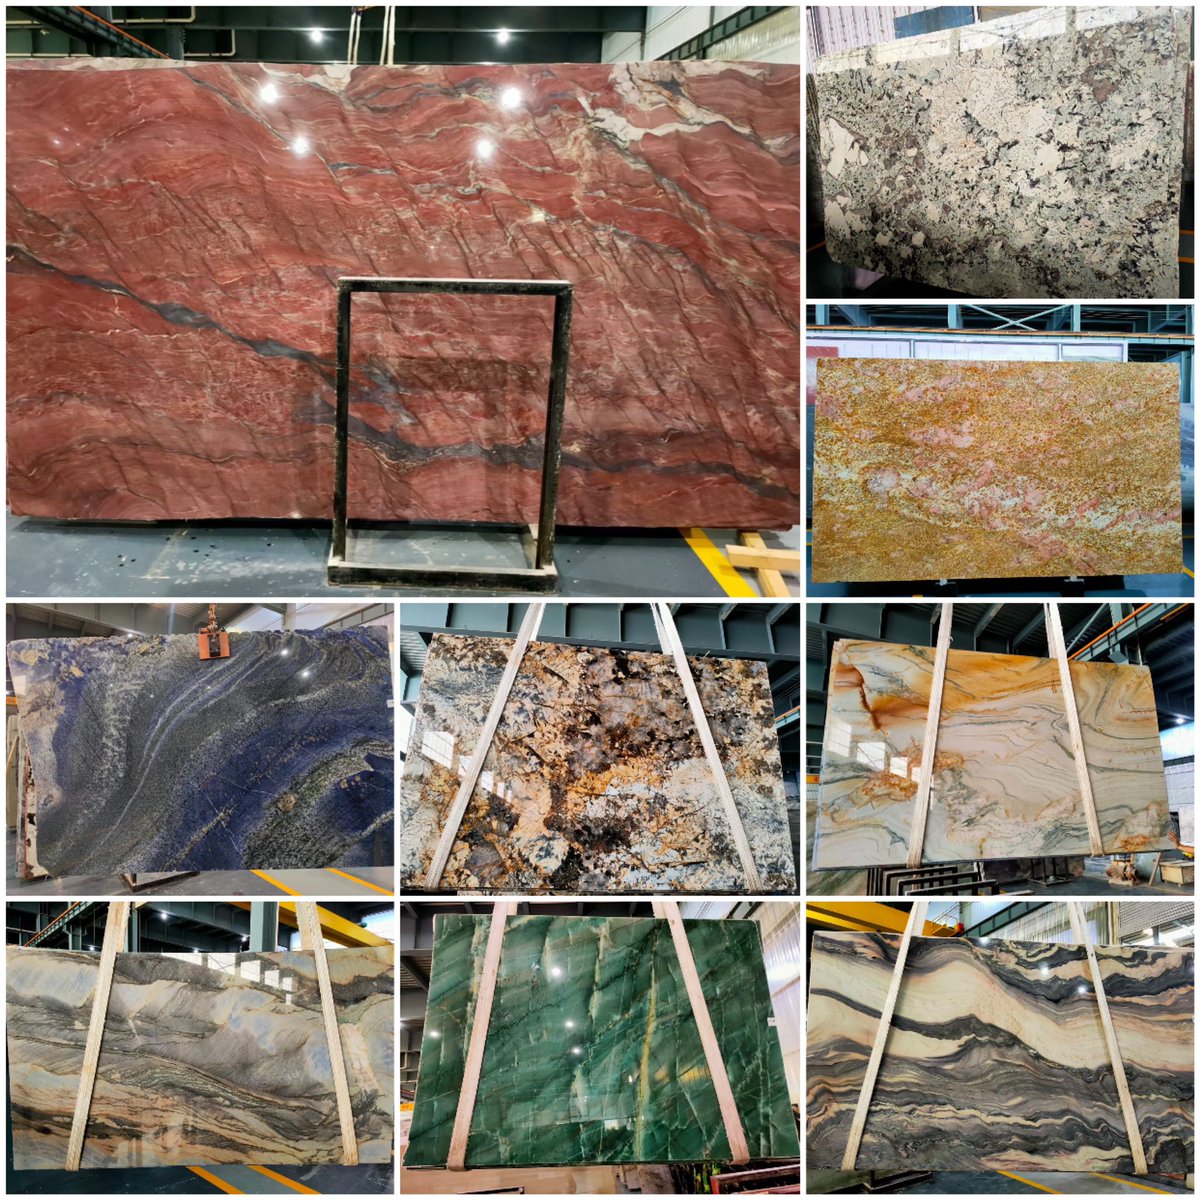 Natural Quartzite Stone Slabs In stock By EDG Stone, welcome to contact for it!
#quartzite #stoneslab #graniteslab #edgstone